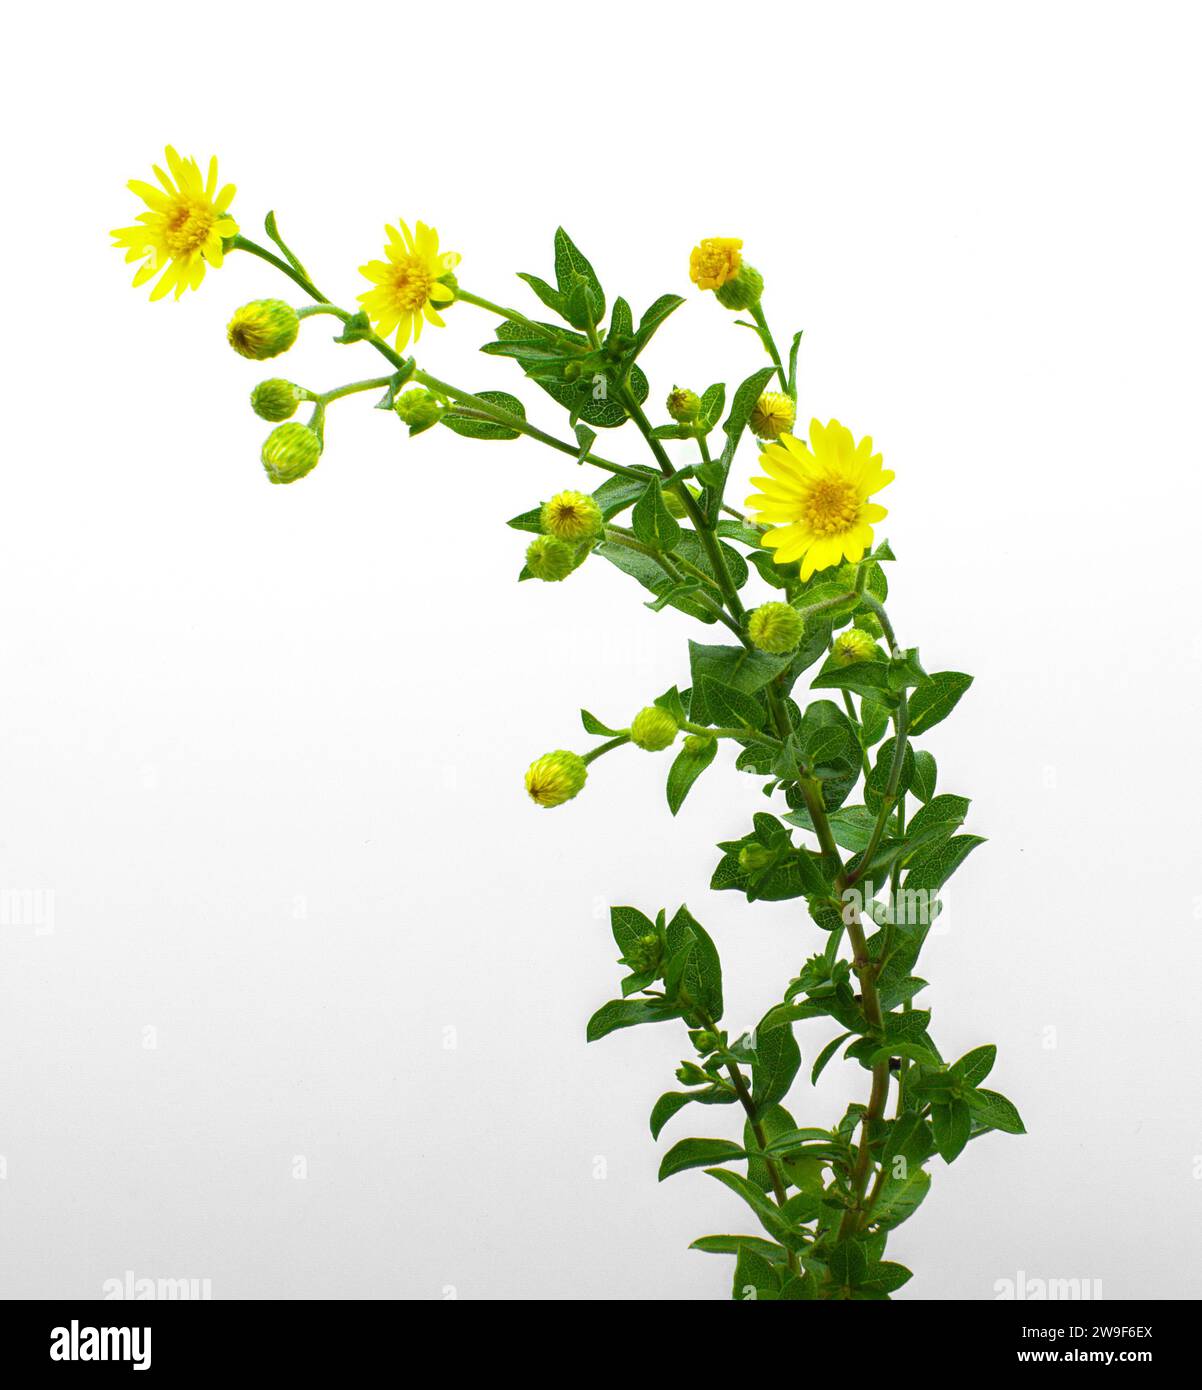 camphorweed or camphor weed - Heterotheca subaxillaris - a perennial, aromatic herb with green hairy bristly stems and small yellow aster flowers. Iso Stock Photo